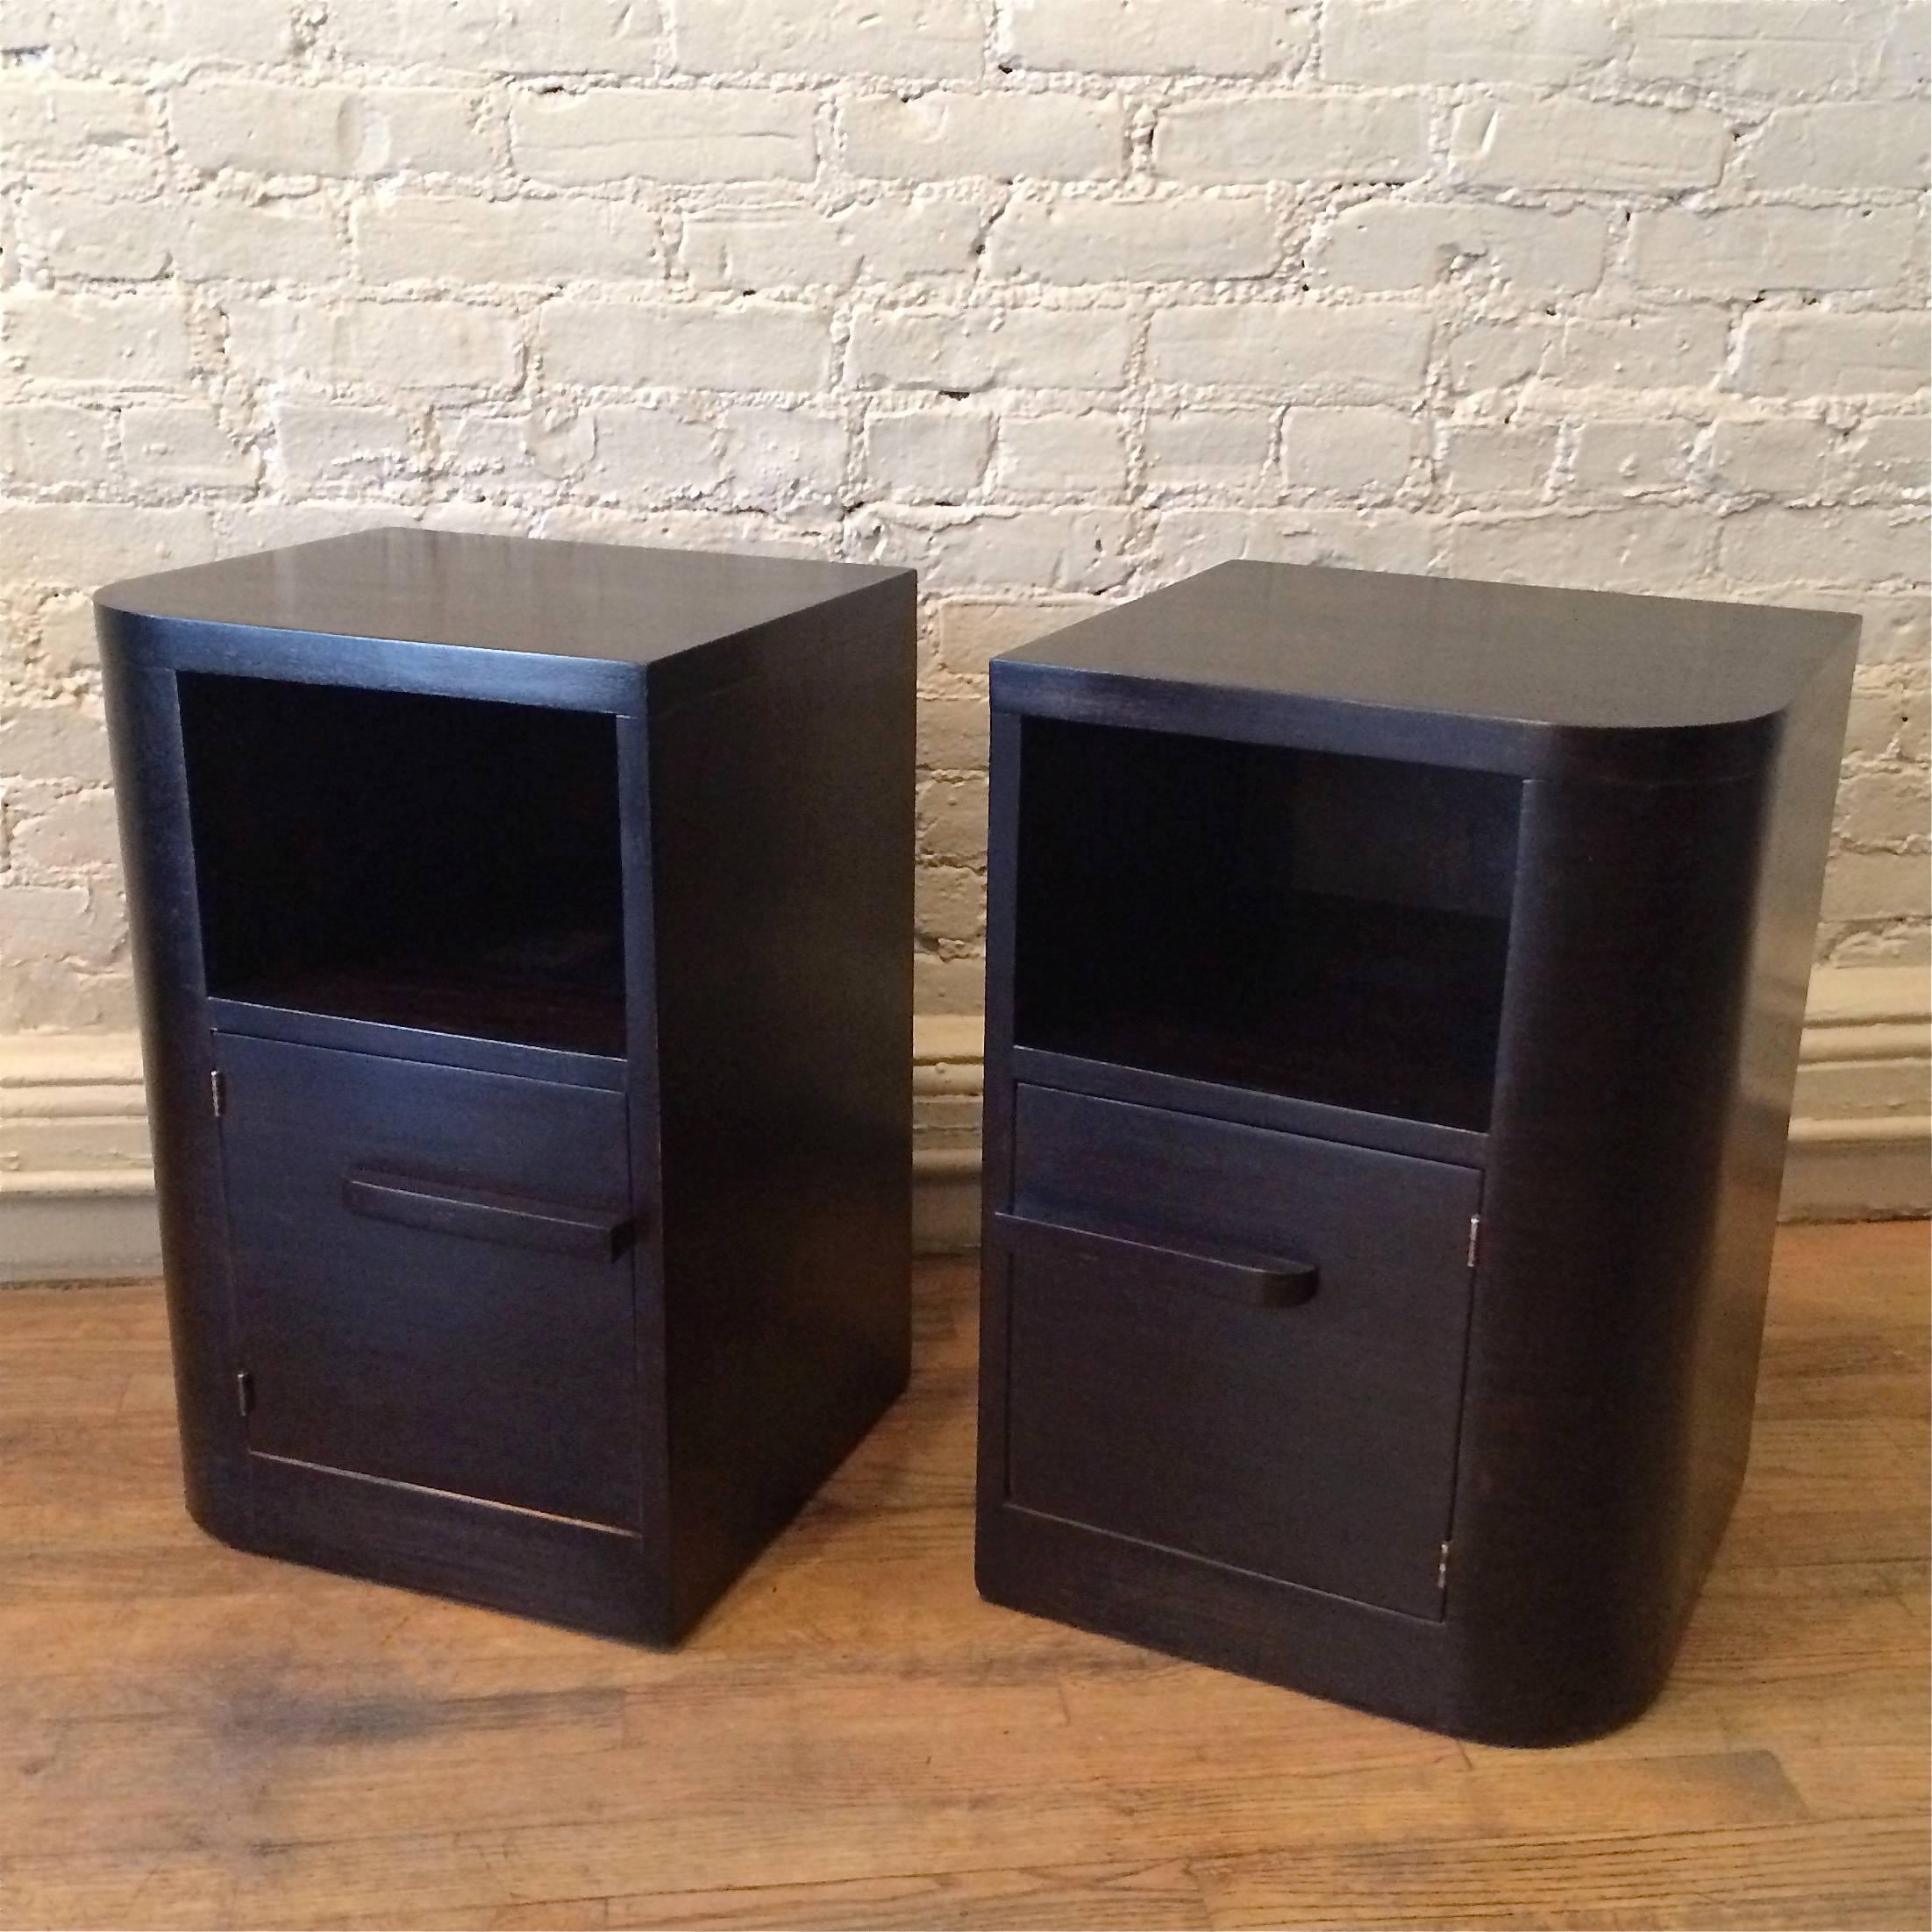 Pair of Art Deco, ebonized maple, nightstands or end tables by Modernage Furniture Company with curved outer edge and open and closed storage.